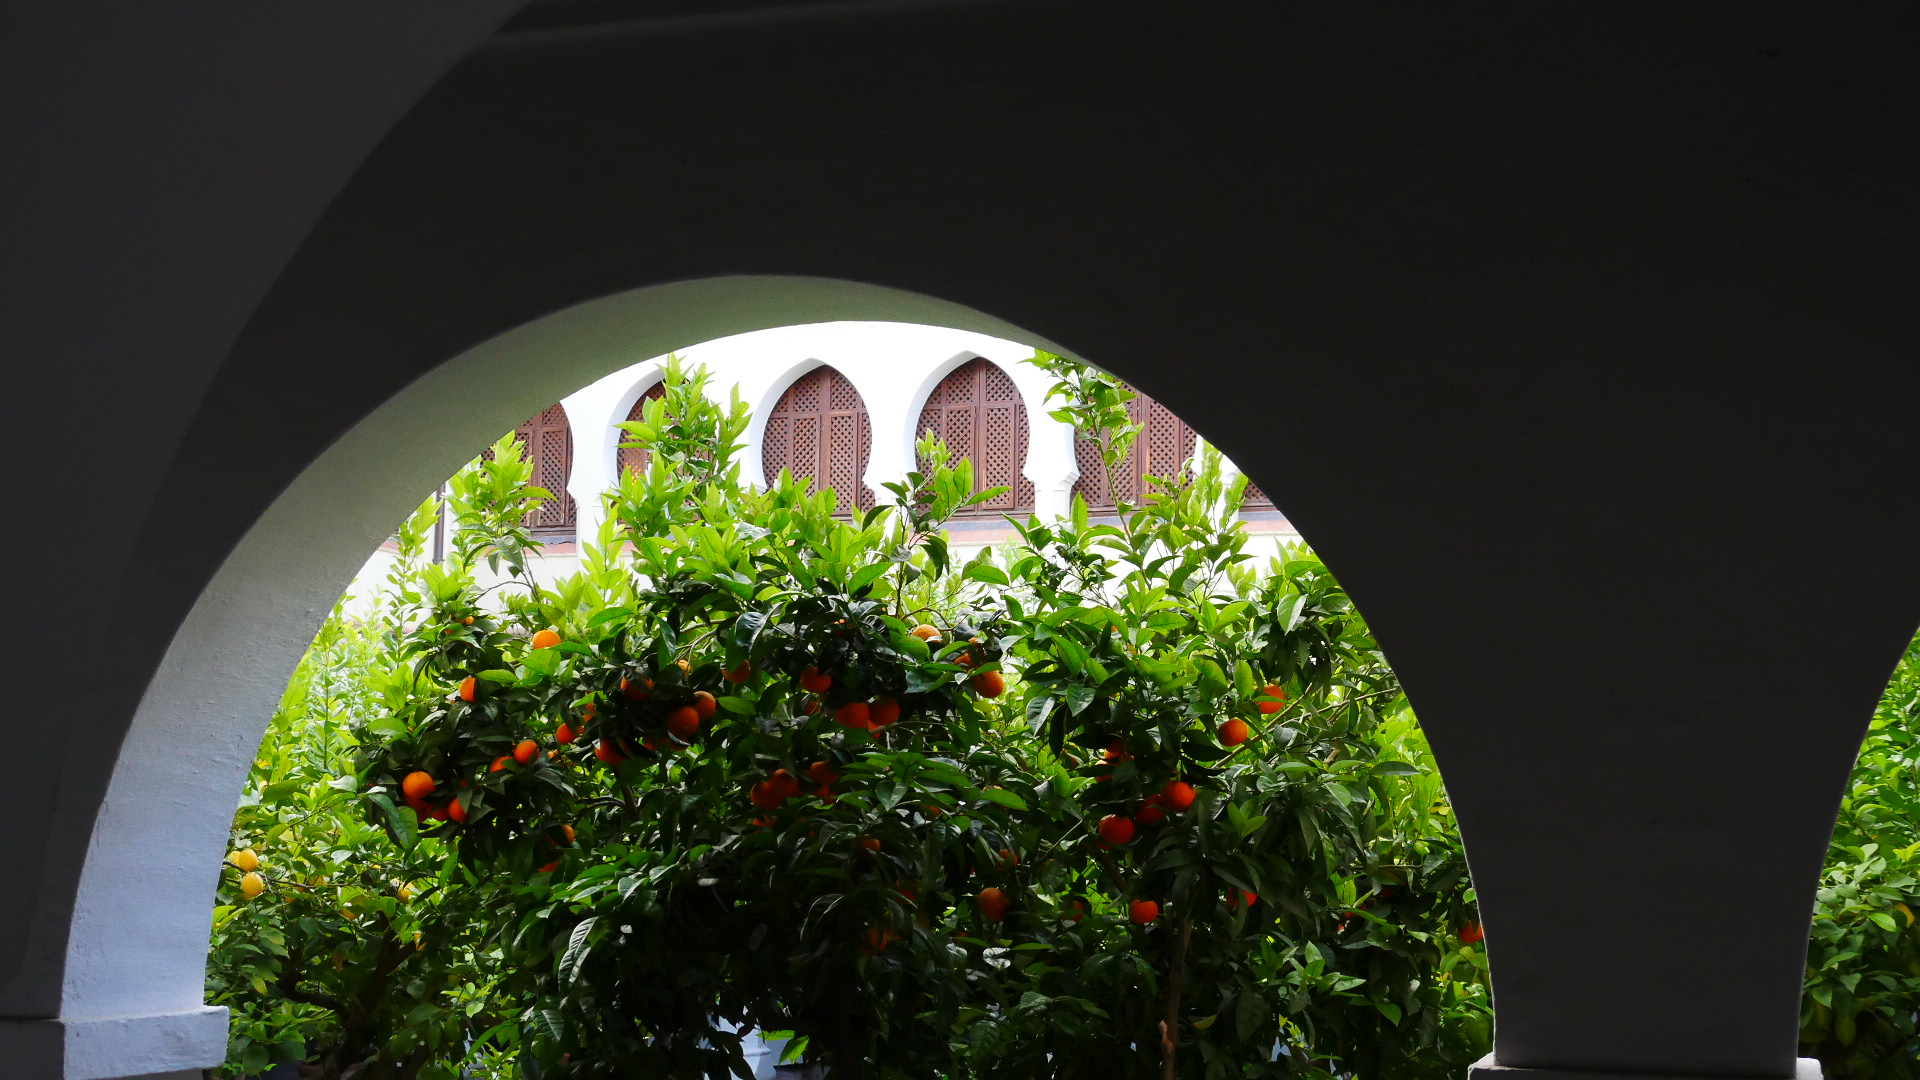 Photo of an orange trees in a plaza, Places of Contemplation near Our Lady of Guadalupe in Spain